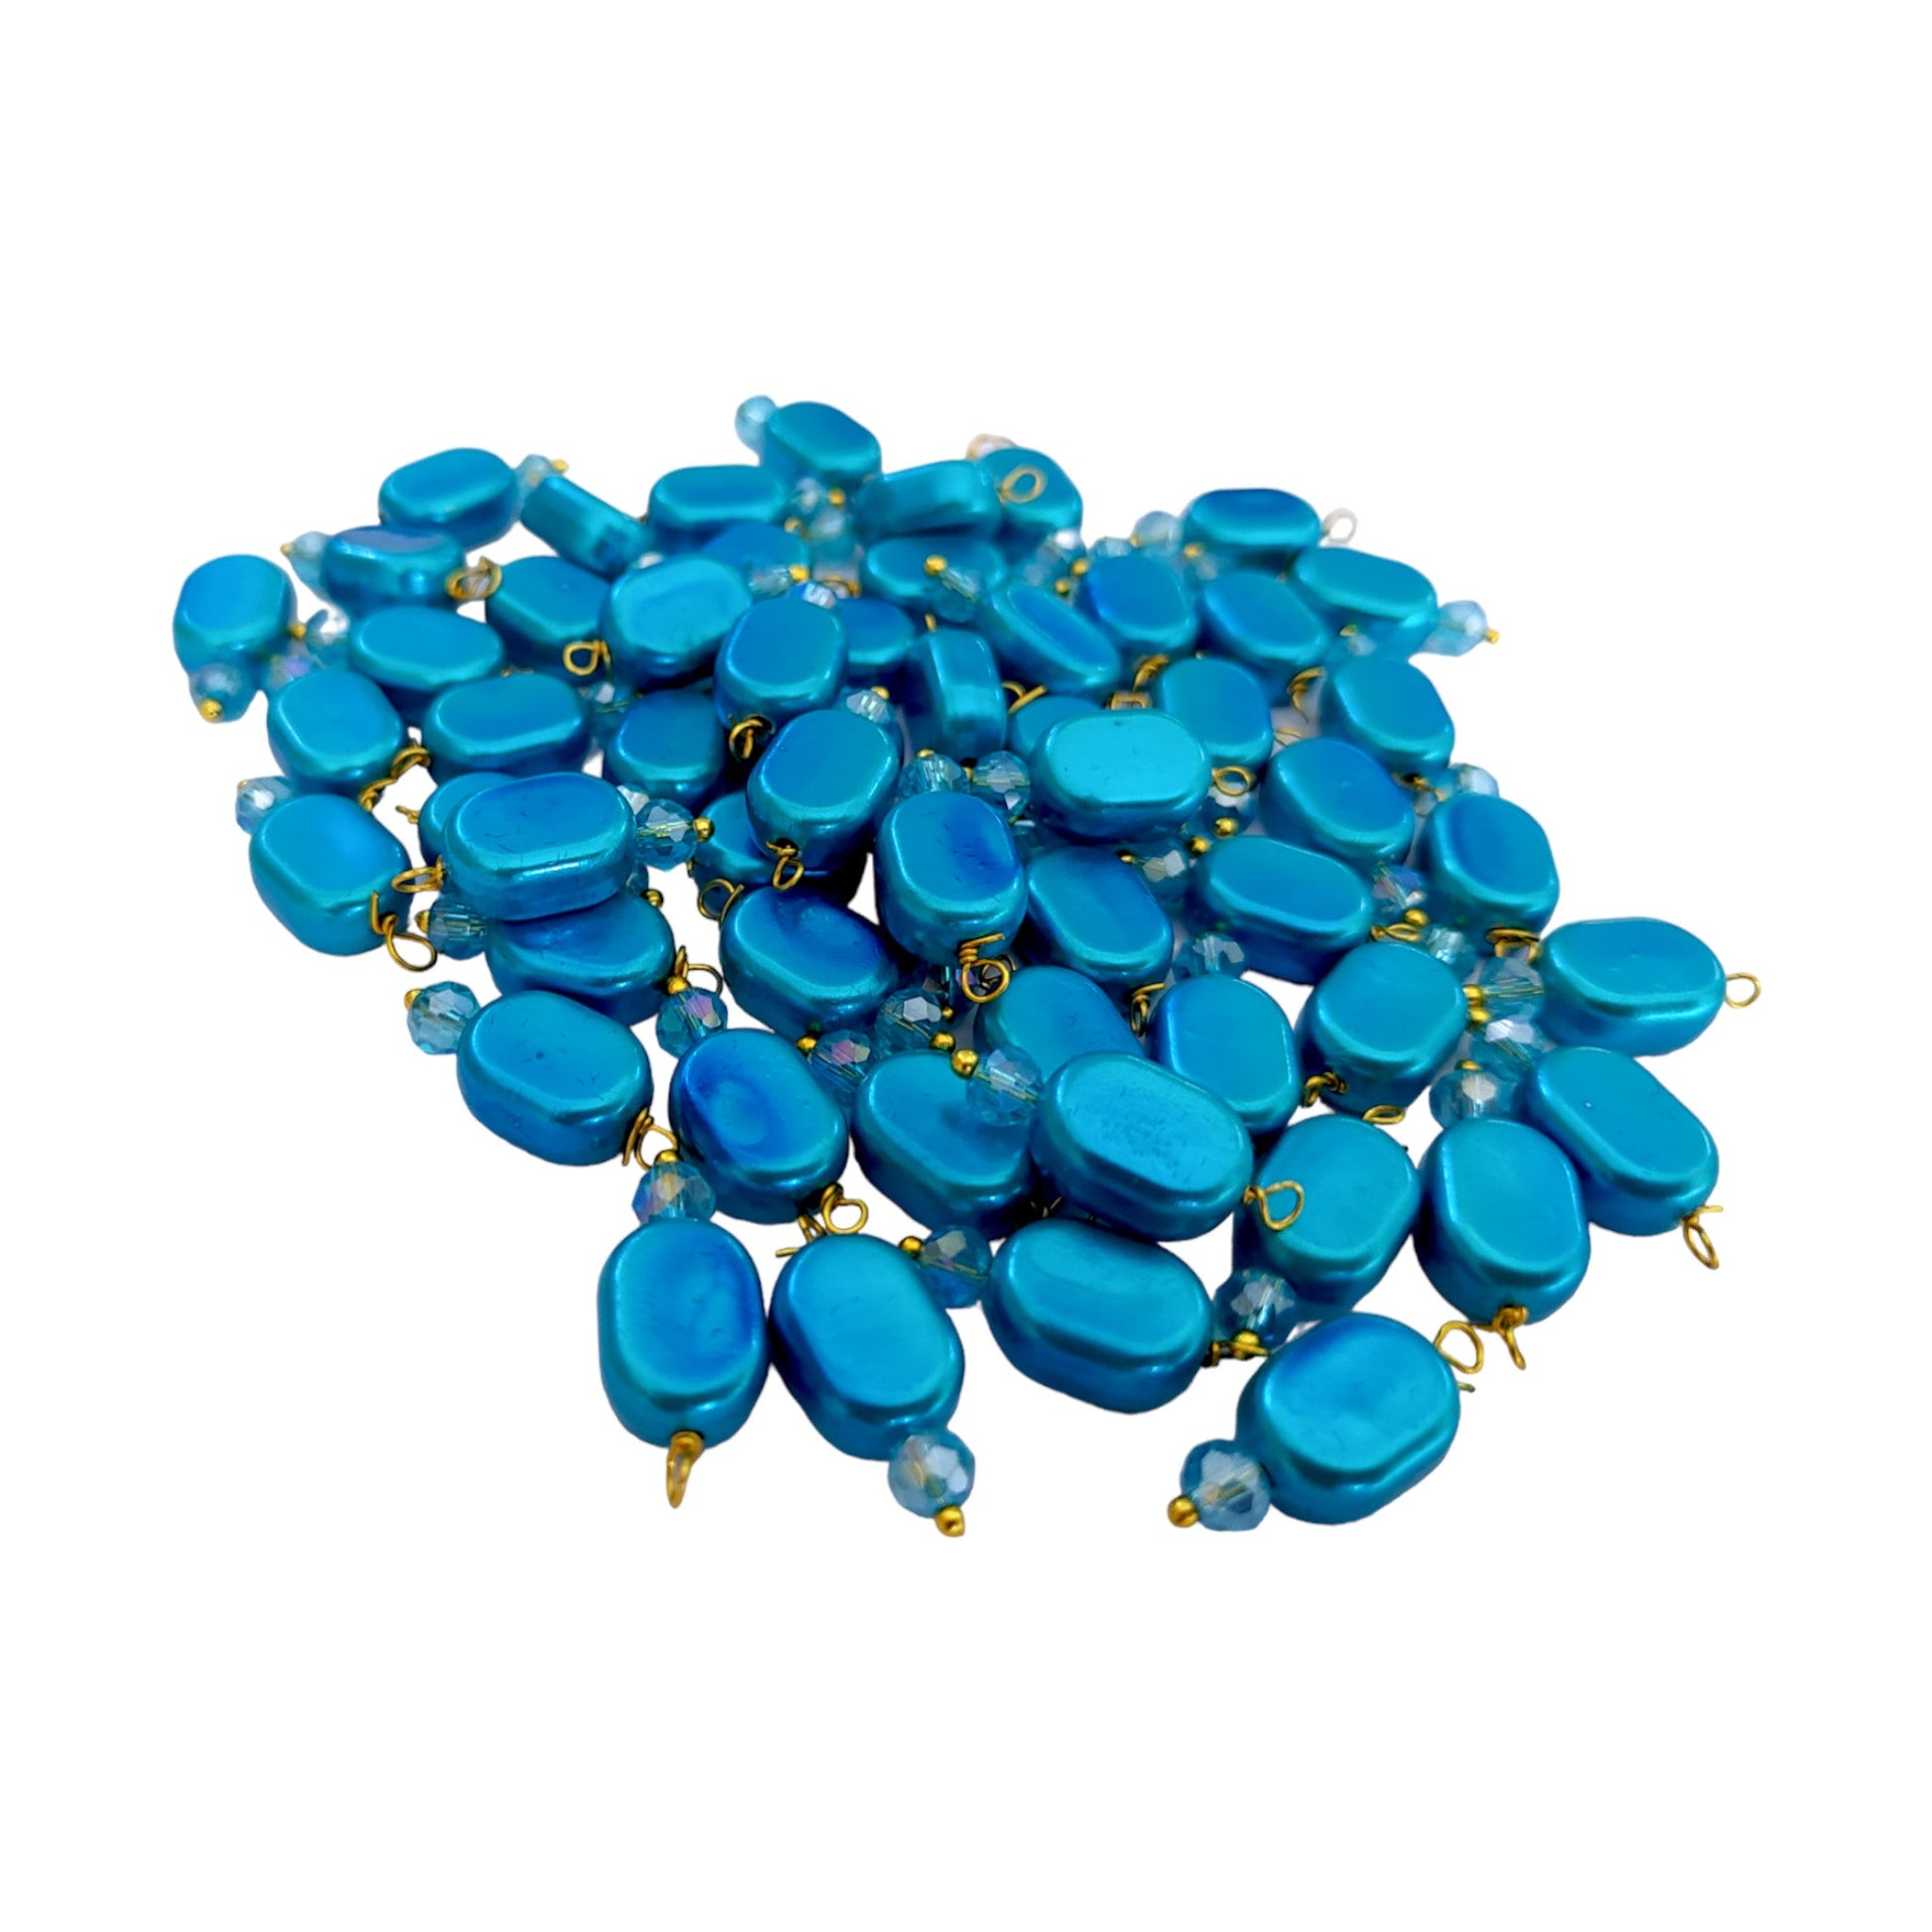 Indian Petals 100Pcs Colored Plastic Bead with Crystal Ball Drop for Craft Décor or Jewelry Making, 8x12mm, Dark Turquoise